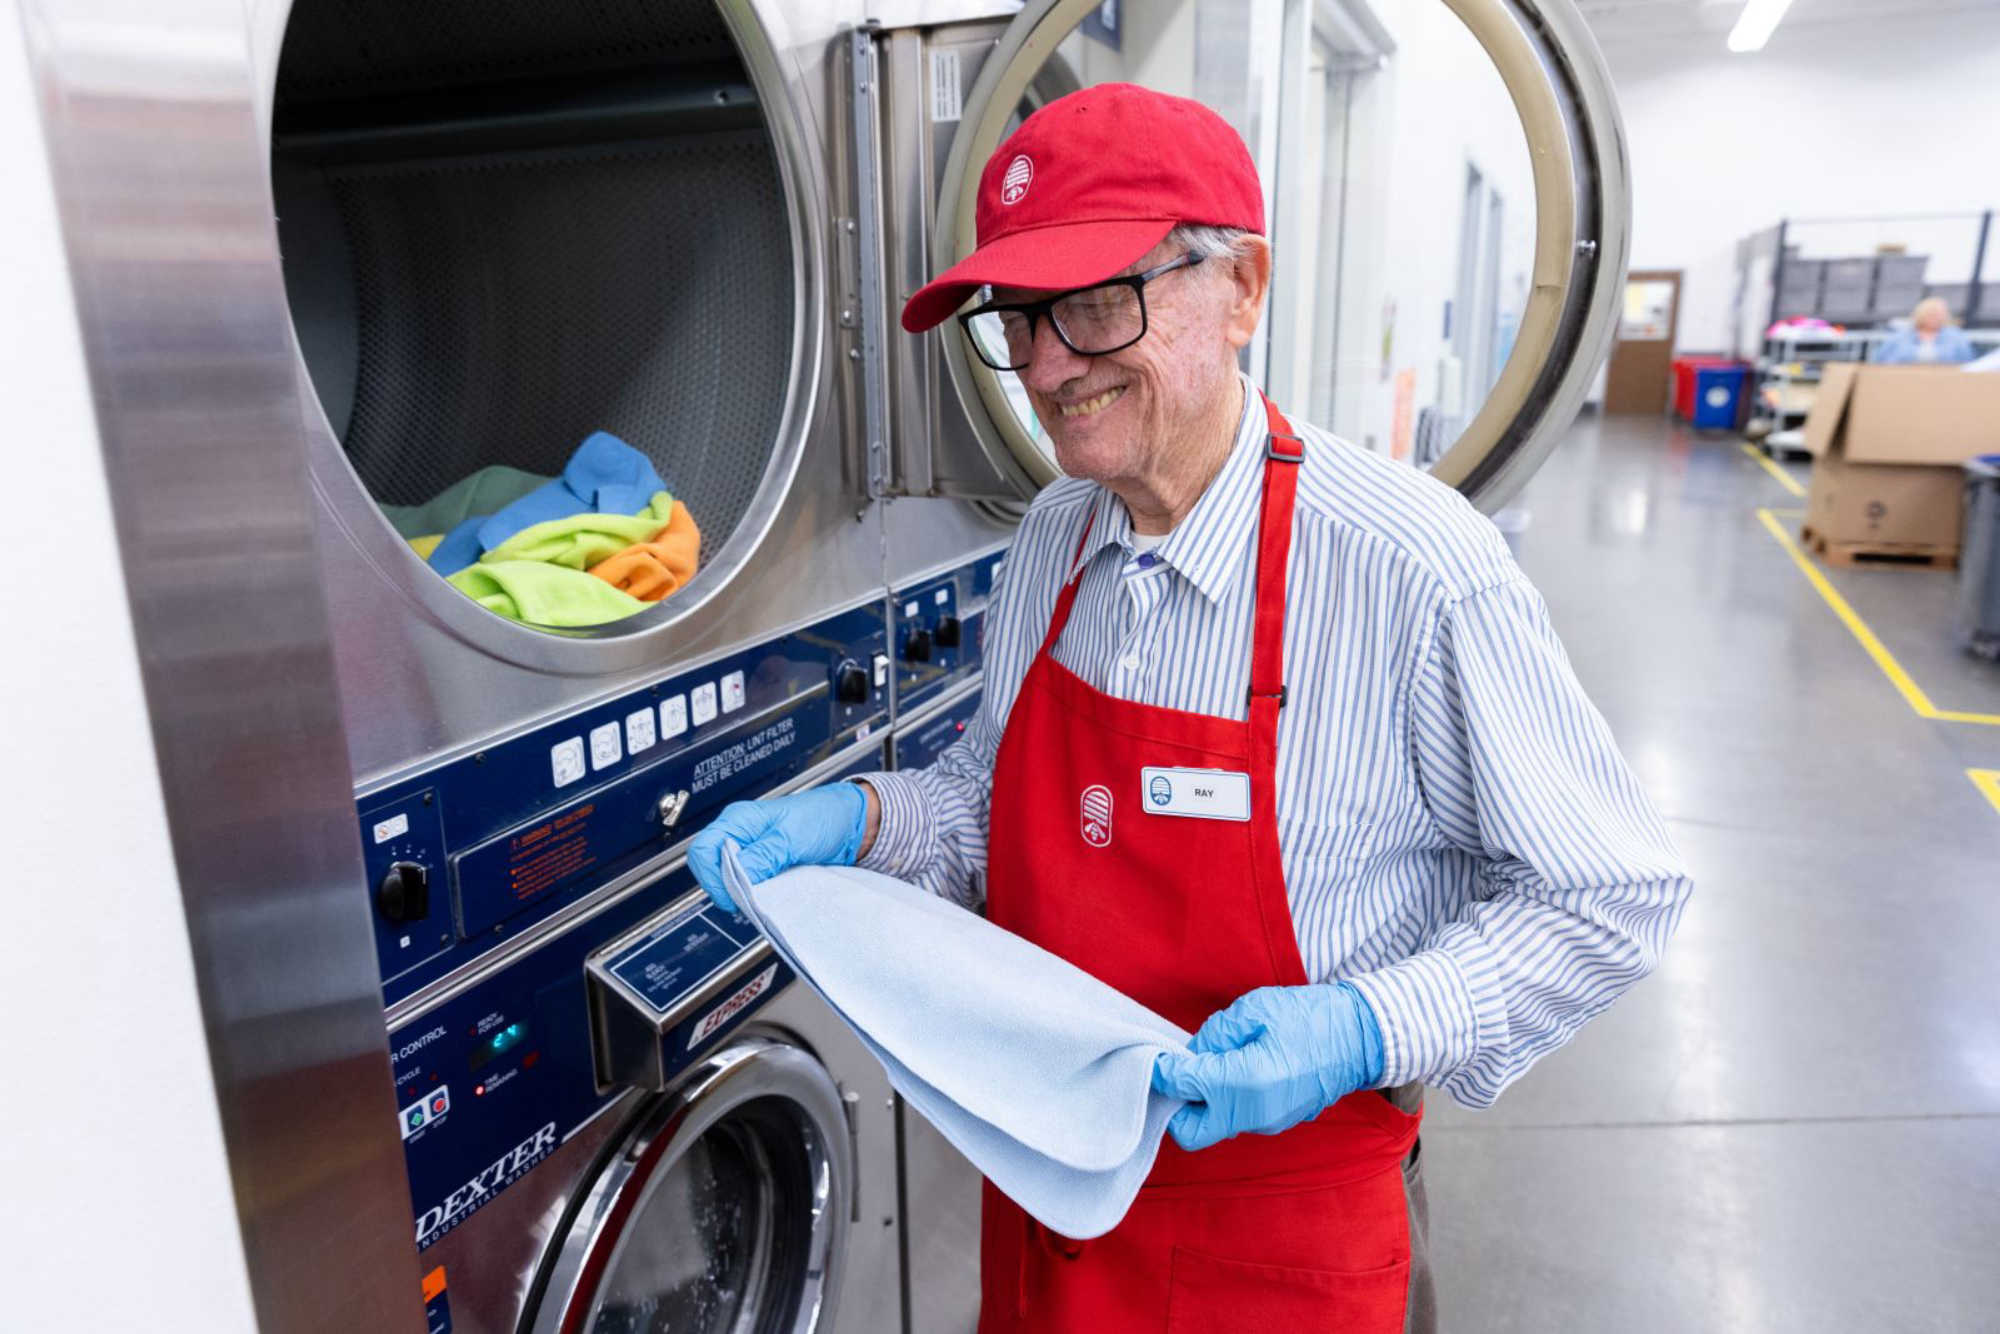 Worker doing laundry